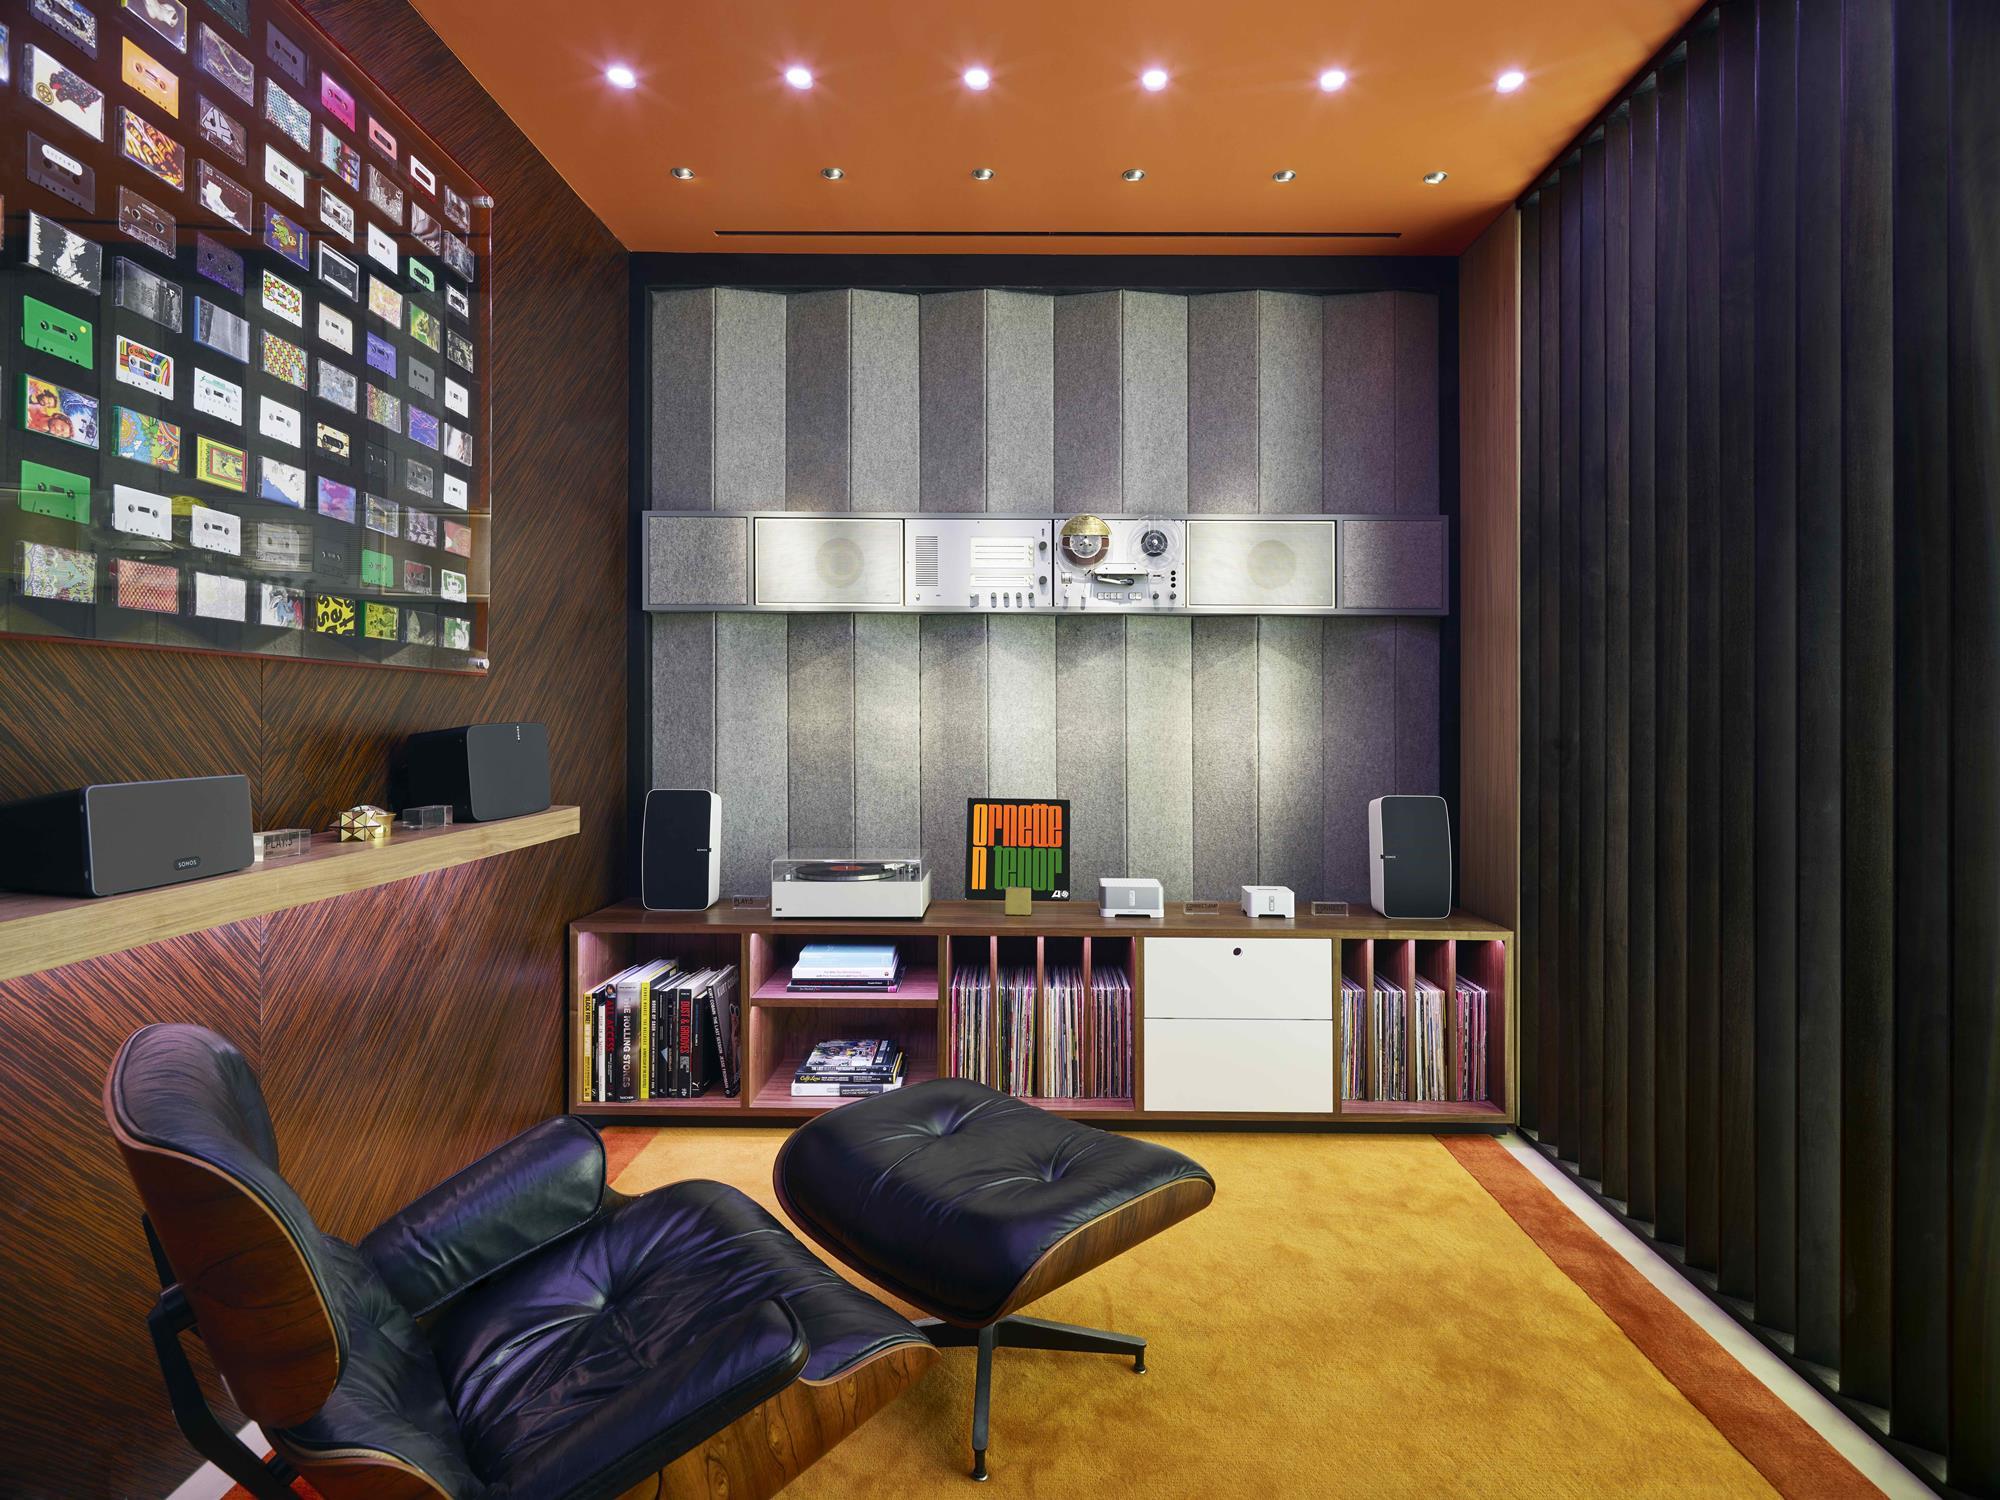 Louis Vuitton SoHo Store Chooses 1 SOUND Tower LCC44's and SUB310's — 1  SOUND